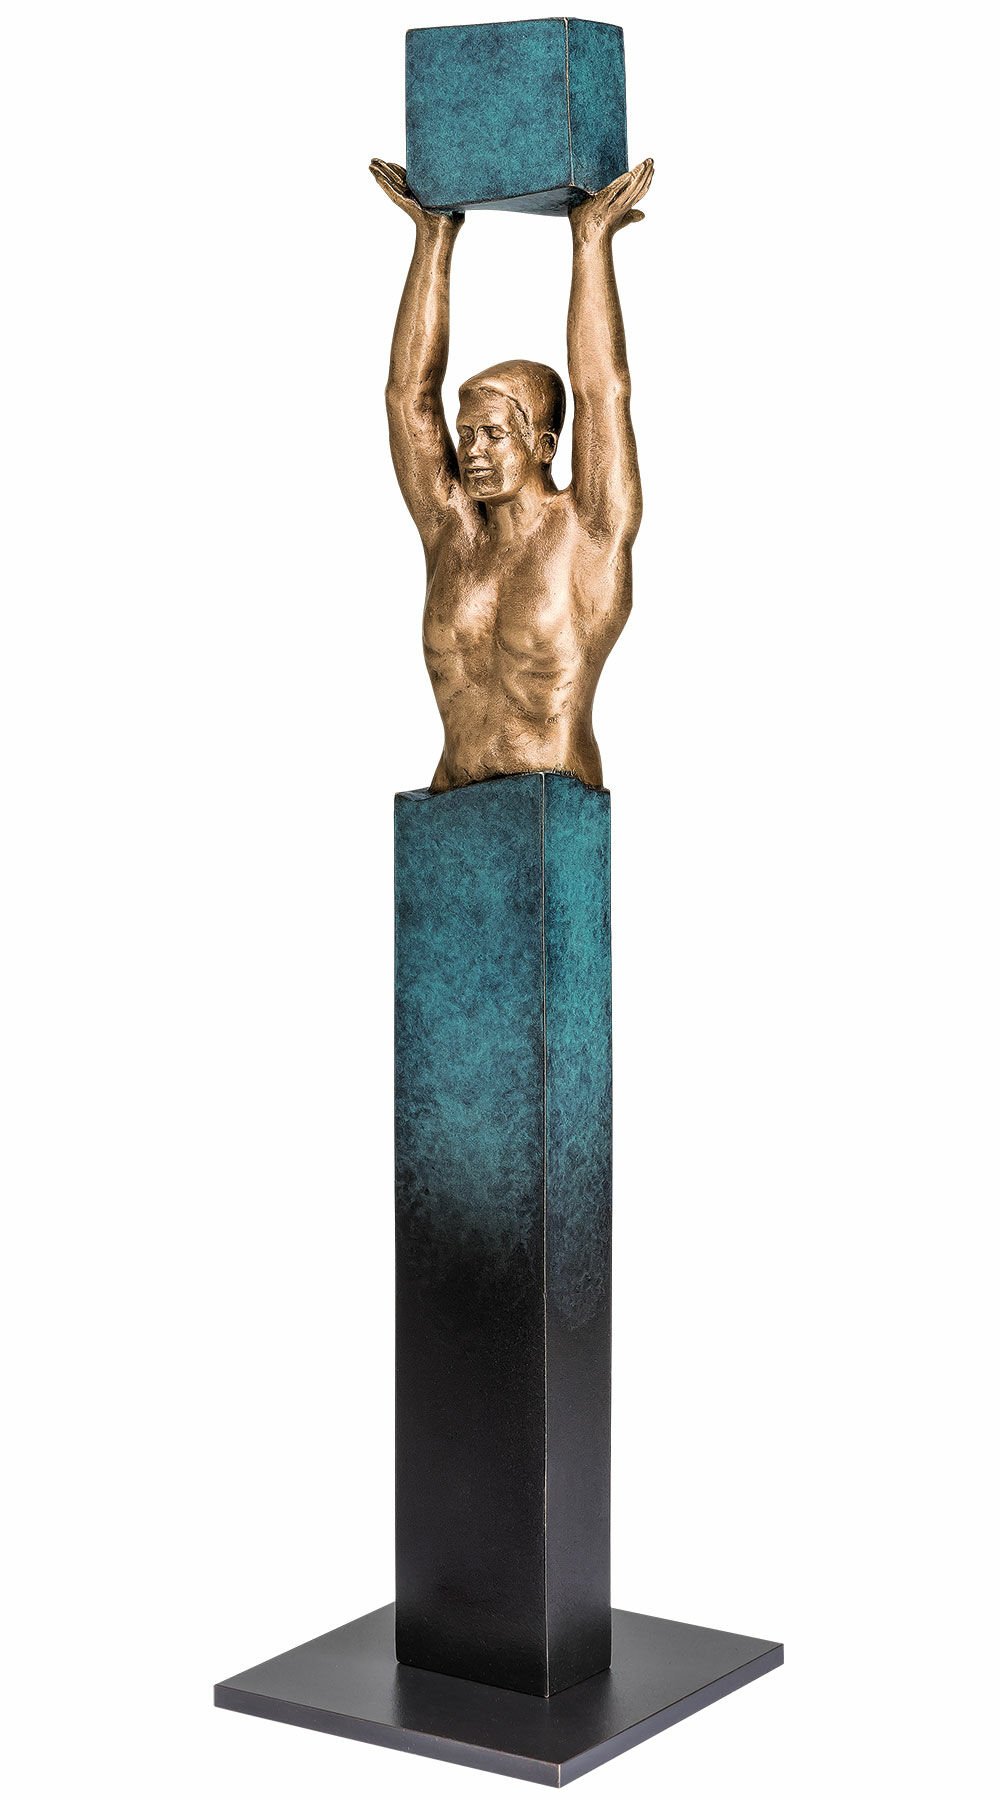 Sculpture "Yes I can", bronze by Annie Jungers